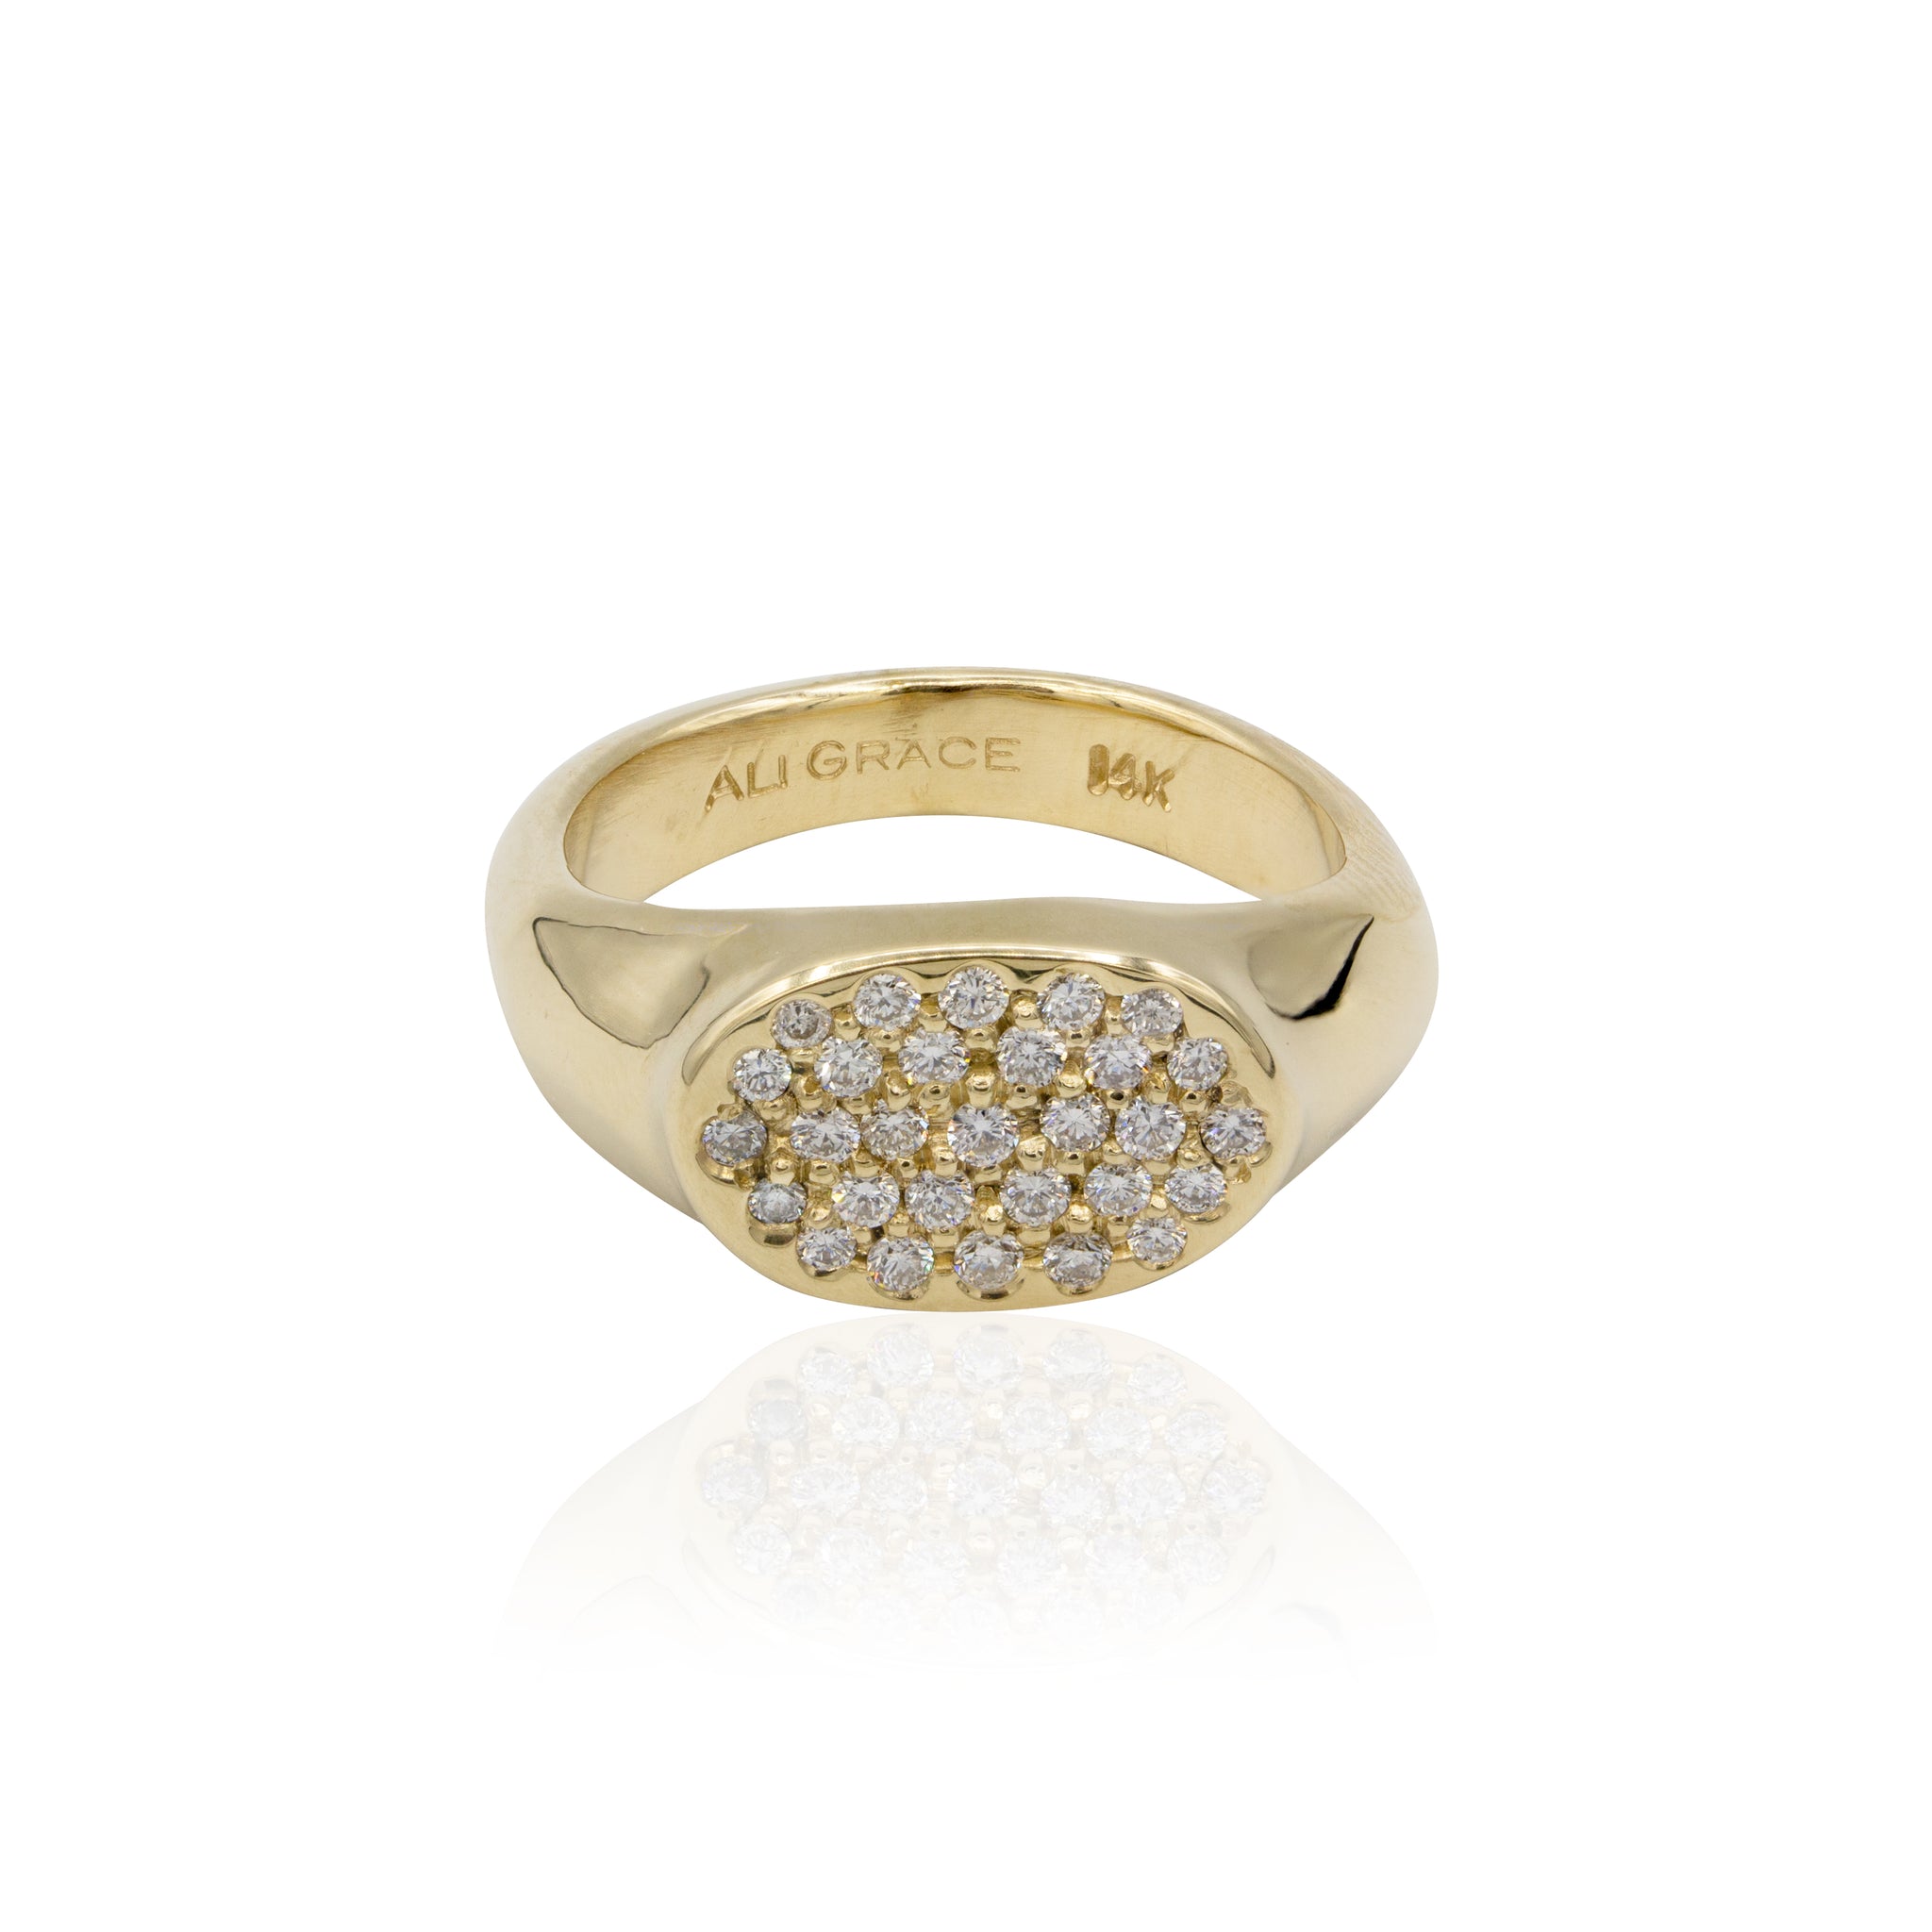 ali grace jewelry sustainable jewelry design pave diamond signet ring statement ring pinky ring